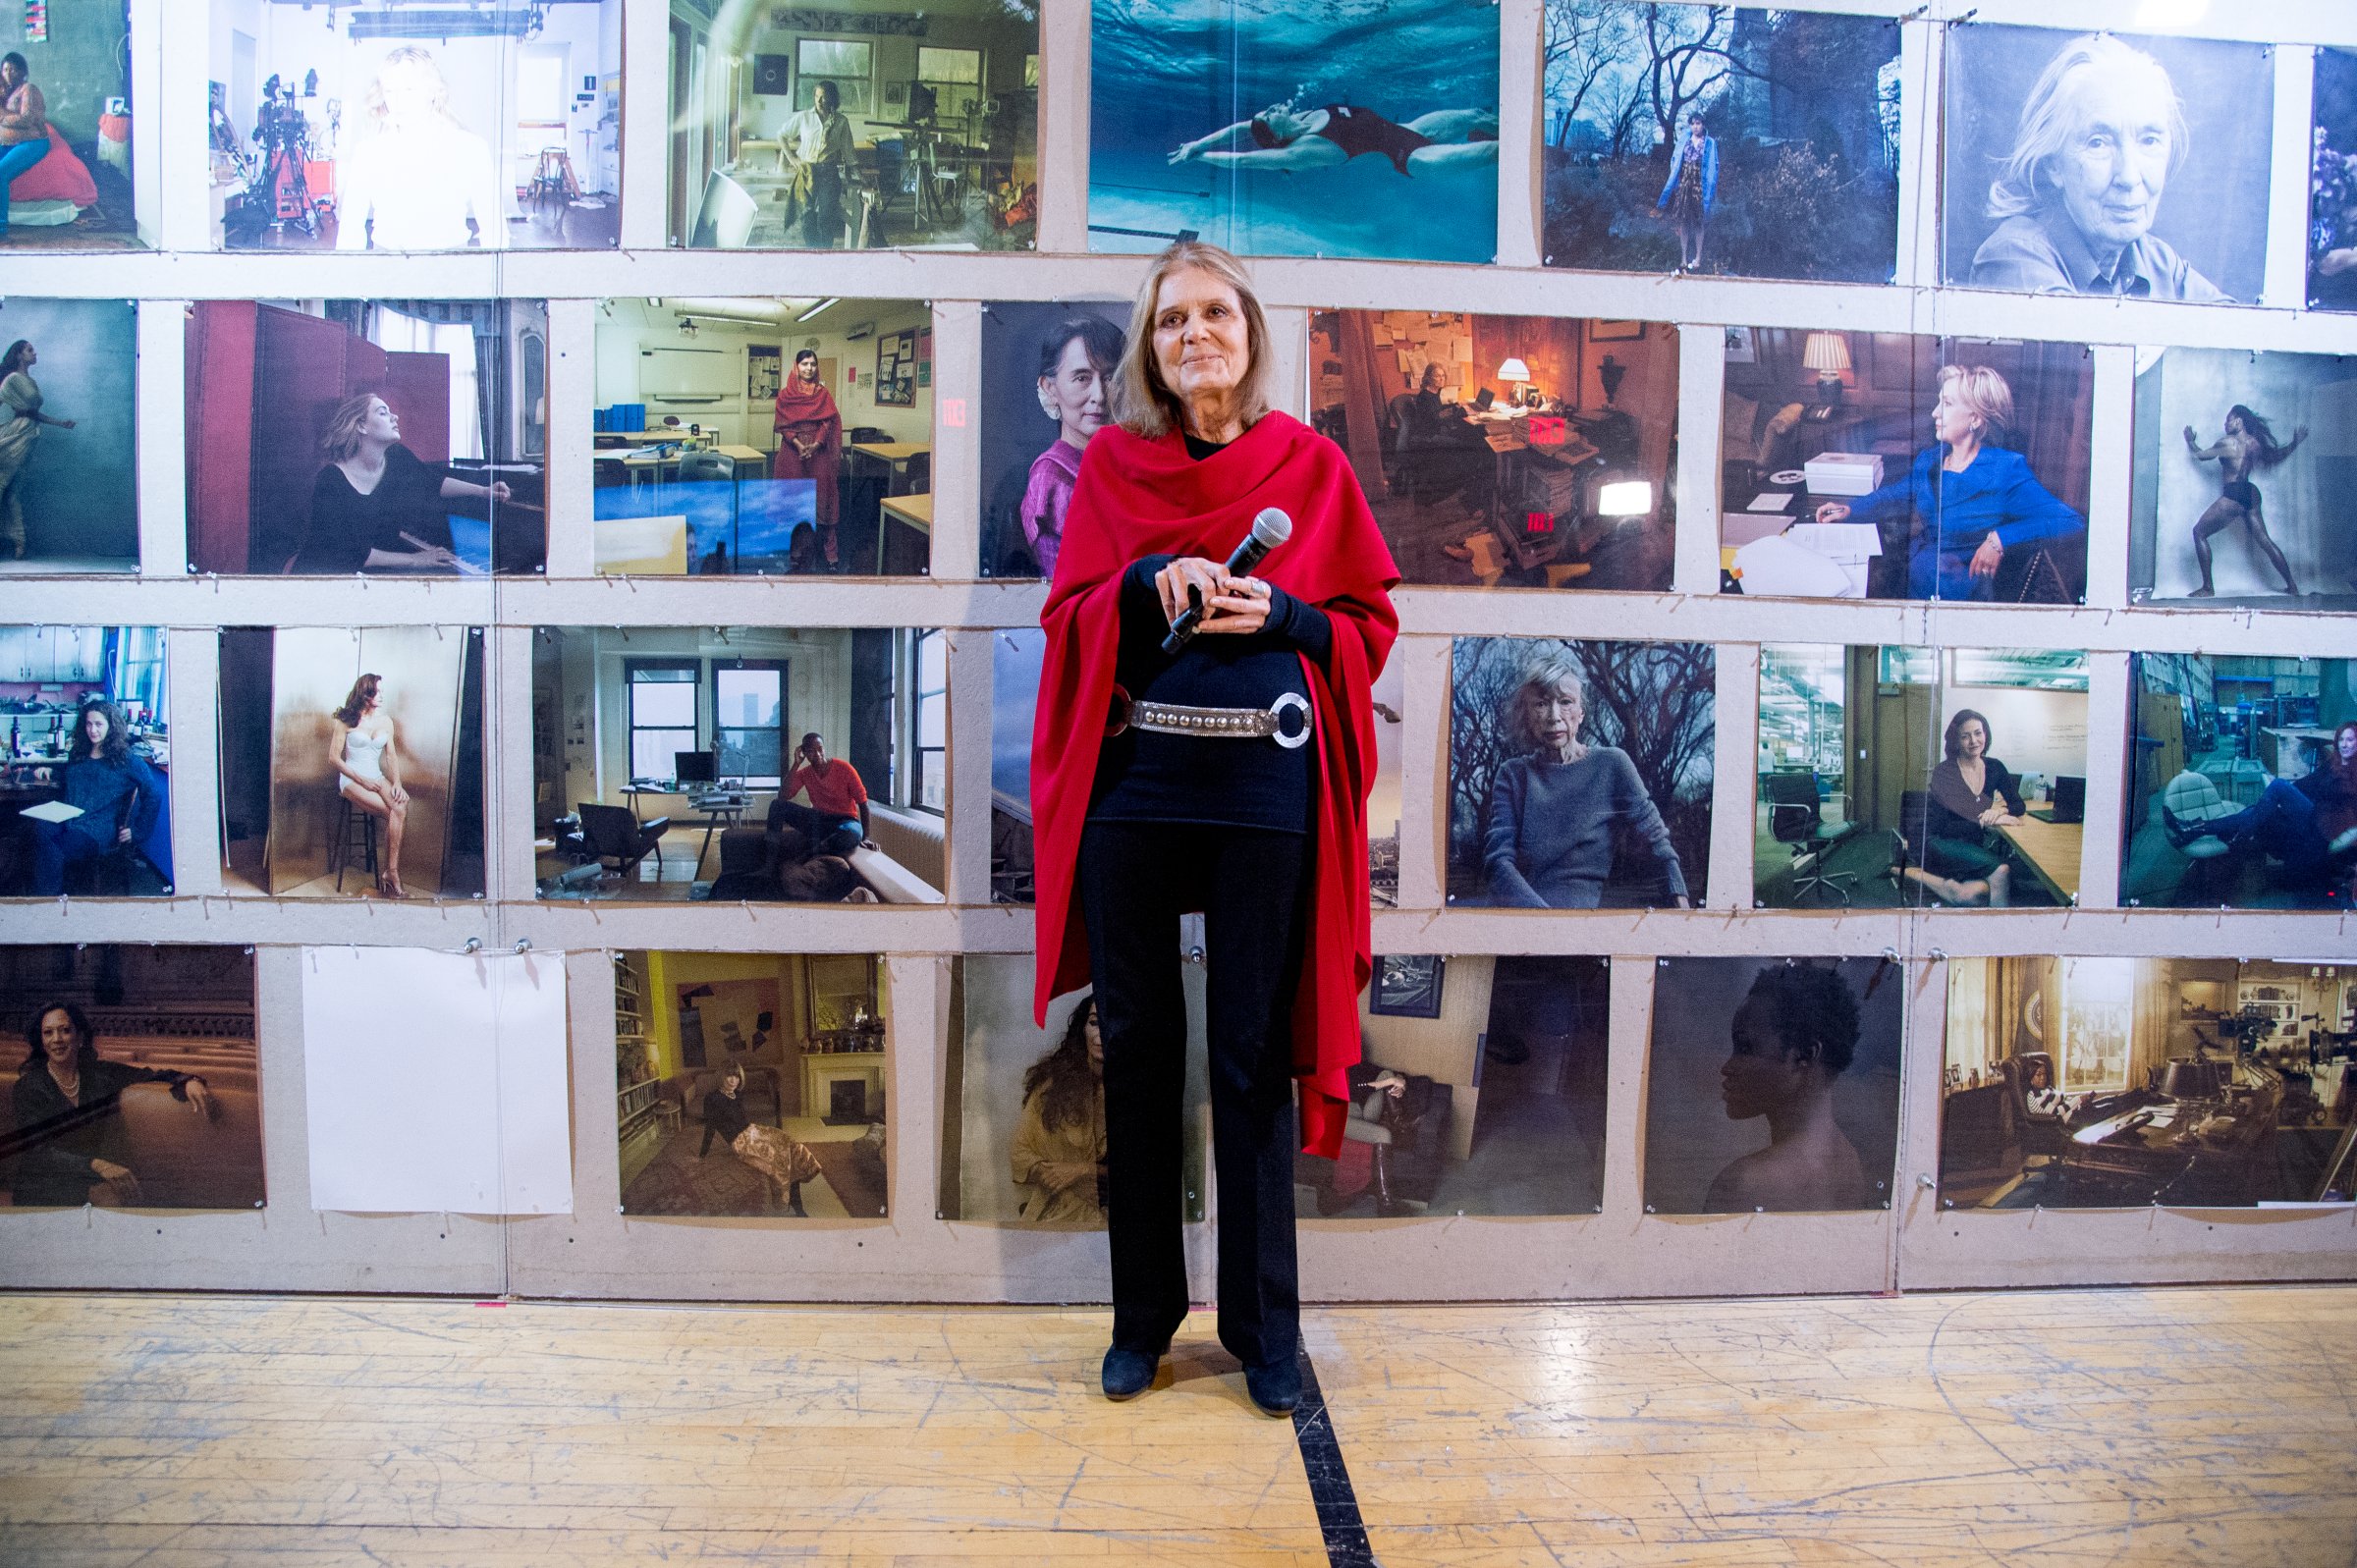 Journalist Gloria Steinem attends Annie Leibovitz's "Women: New Portraits" Exhibition Opens In New York on November 15, 2016 at the former Bayview Correctional Facility in New York City.